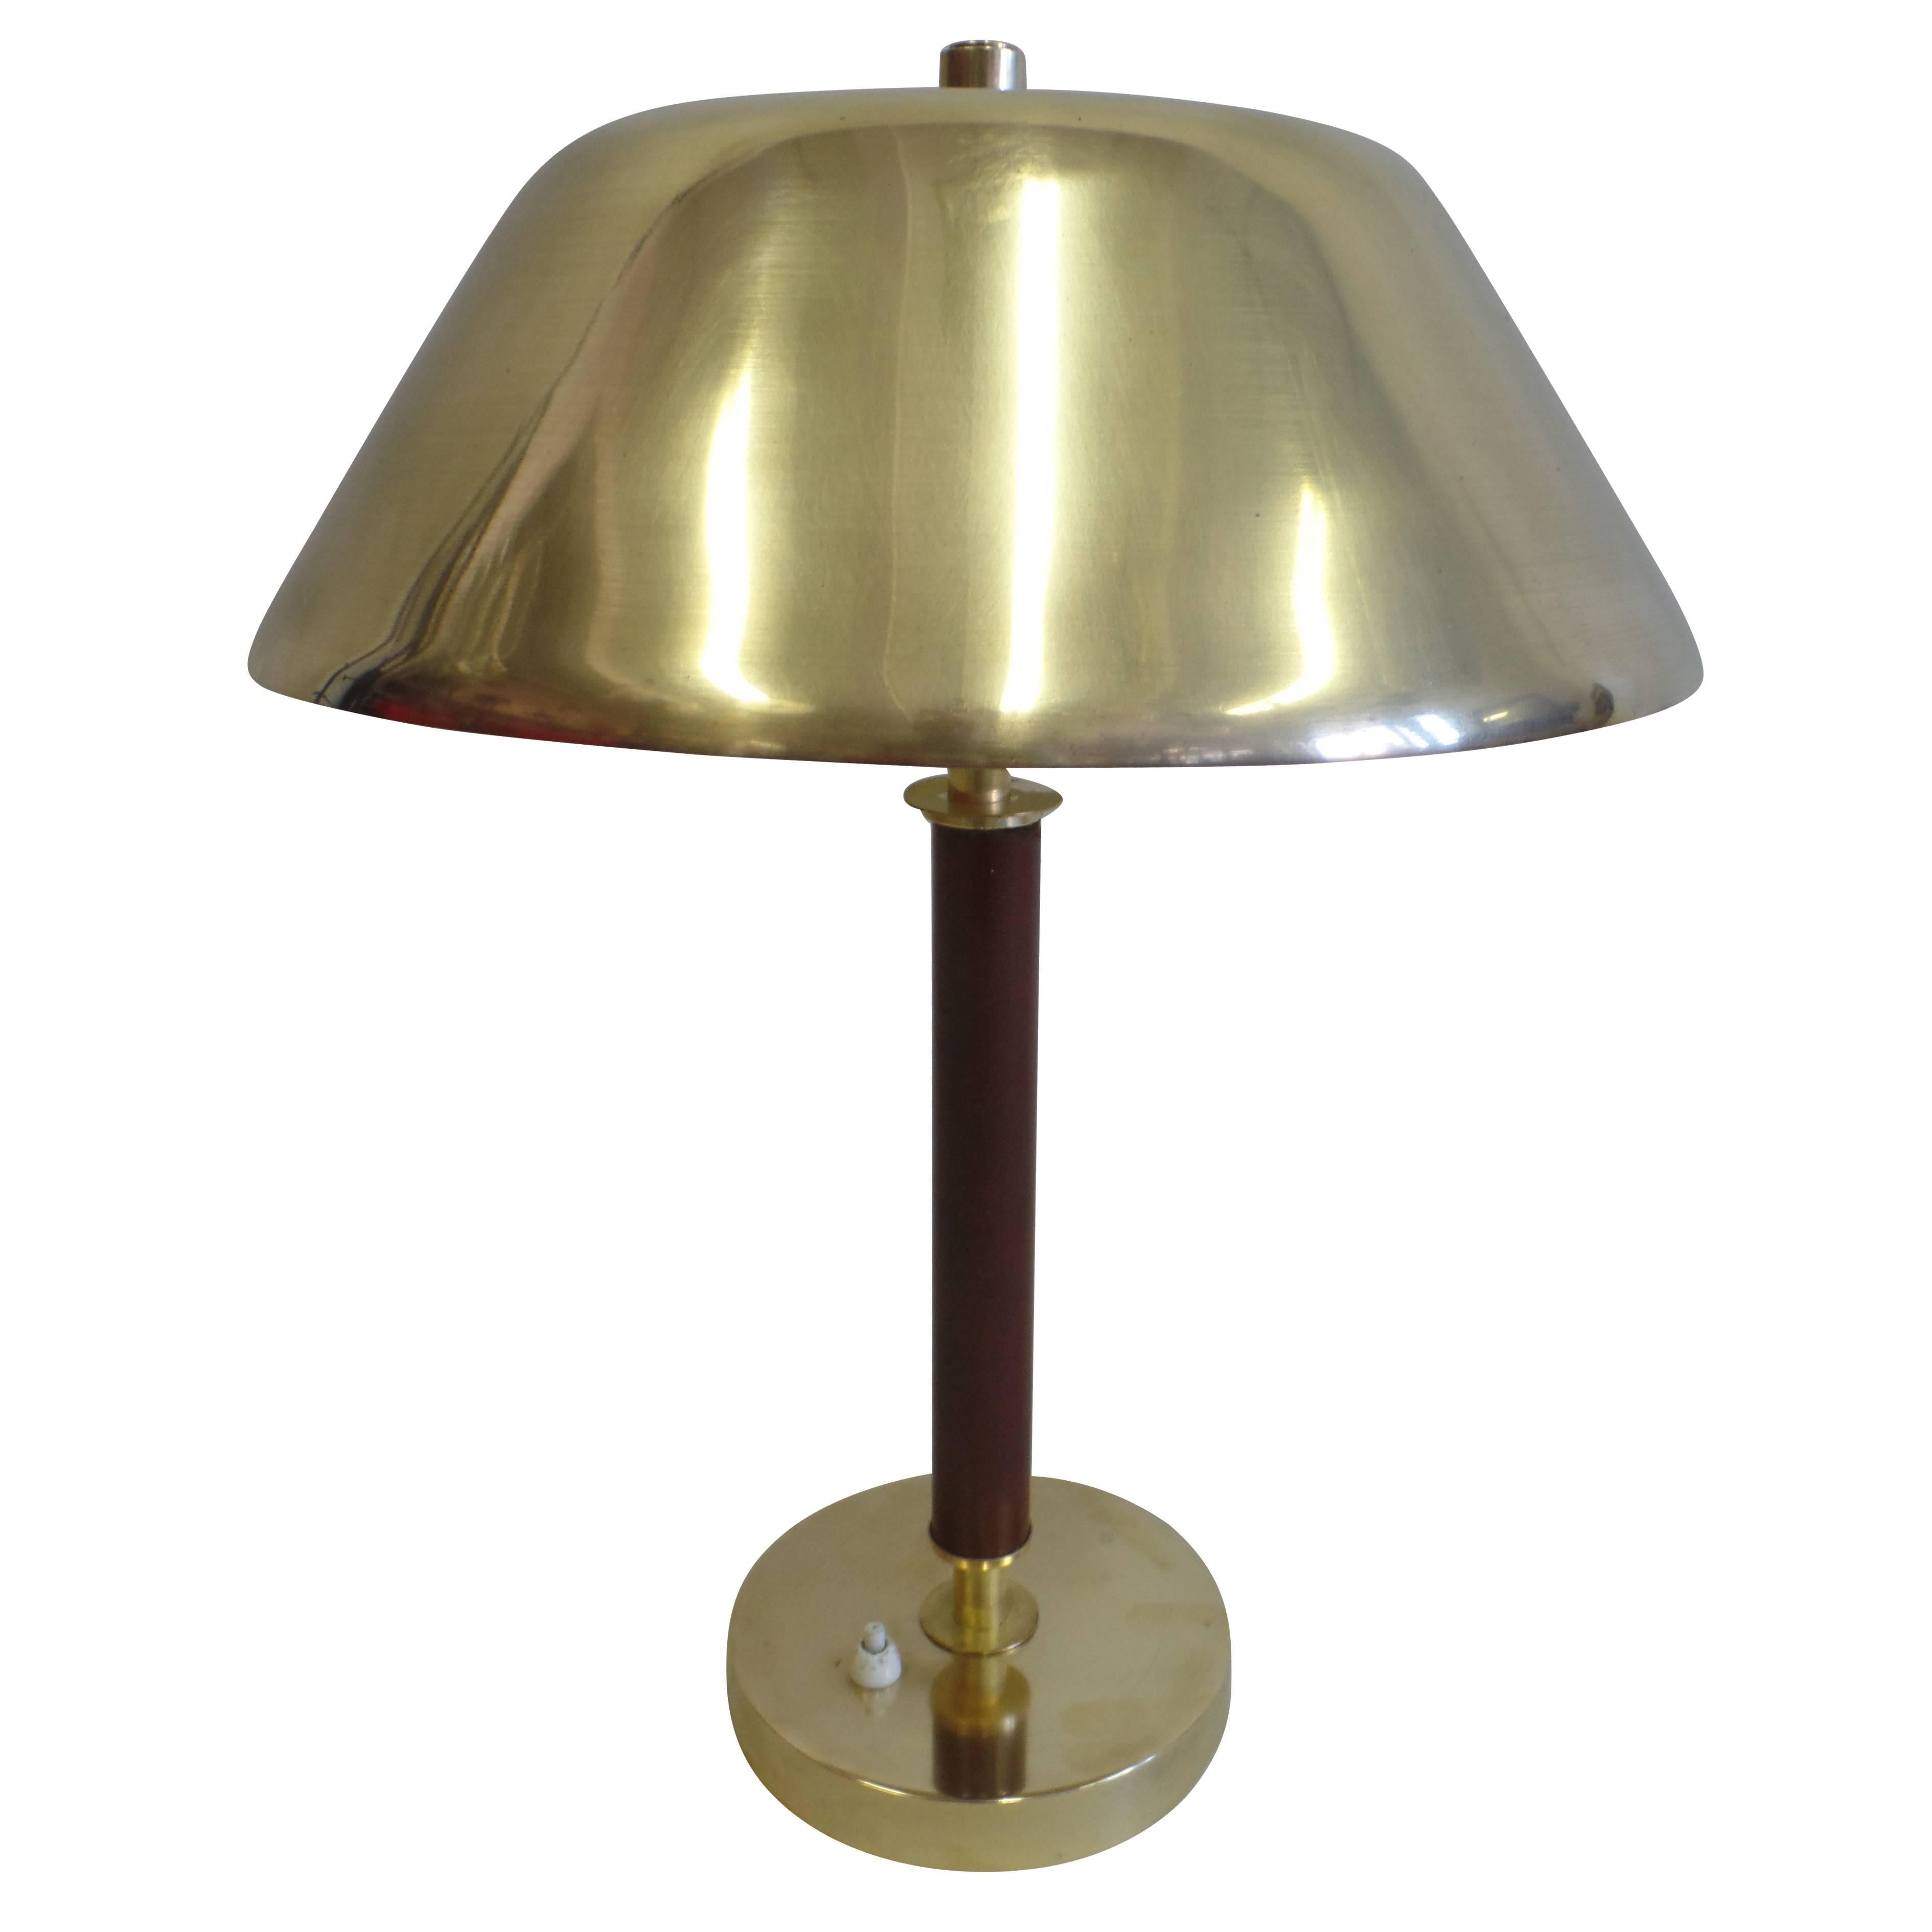 Sober, Modern Brass and Stitched Leather Desk Lamp Attributed to Jacques Adnet